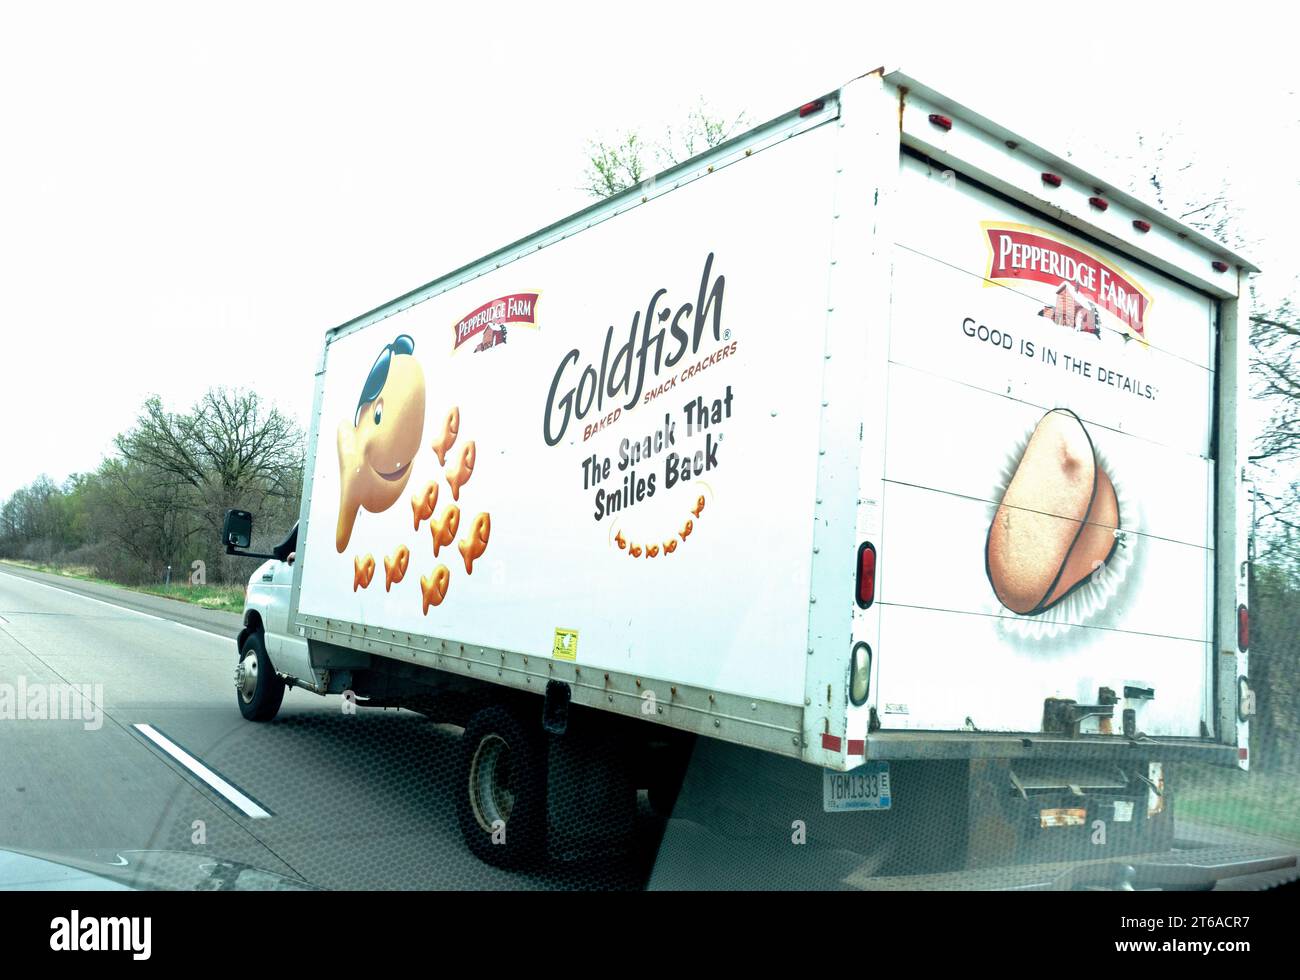 Truck delivering Pepperidge Farm Goldfish baked goods to grocery stores.  Minnesota MN USA Stock Photo